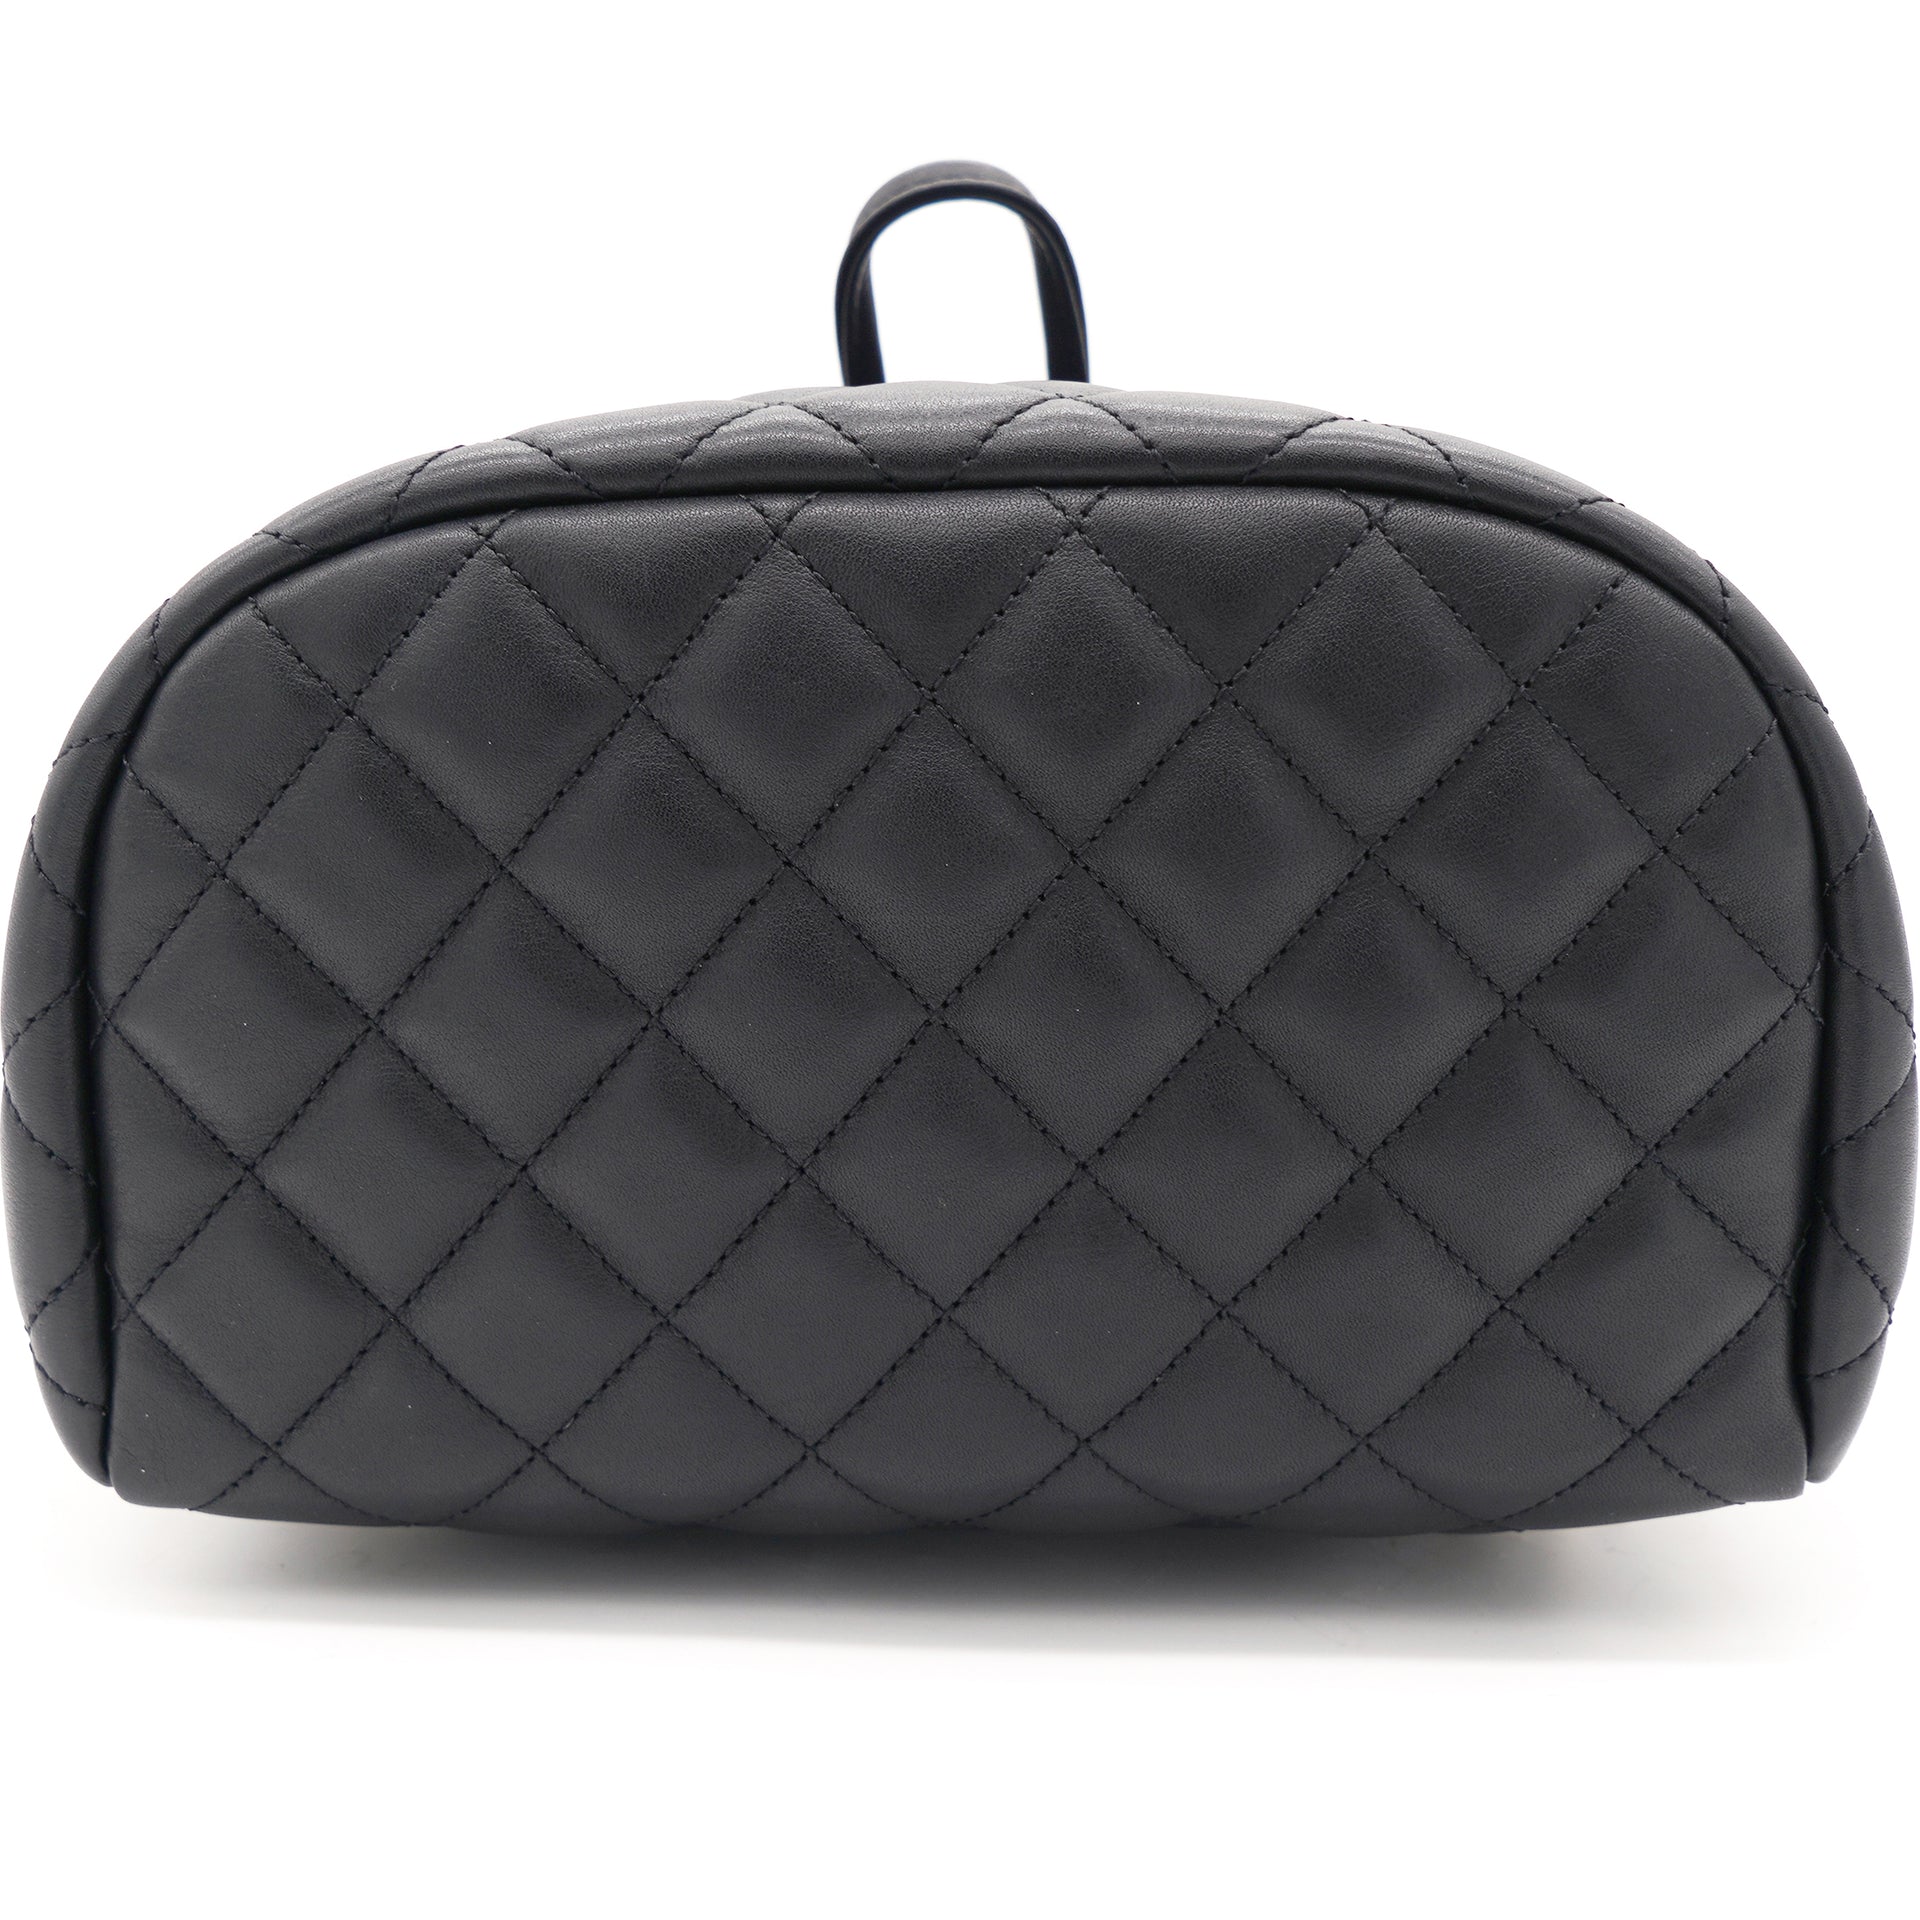 Calfskin Quilted Small Urban Spirit Backpack Black